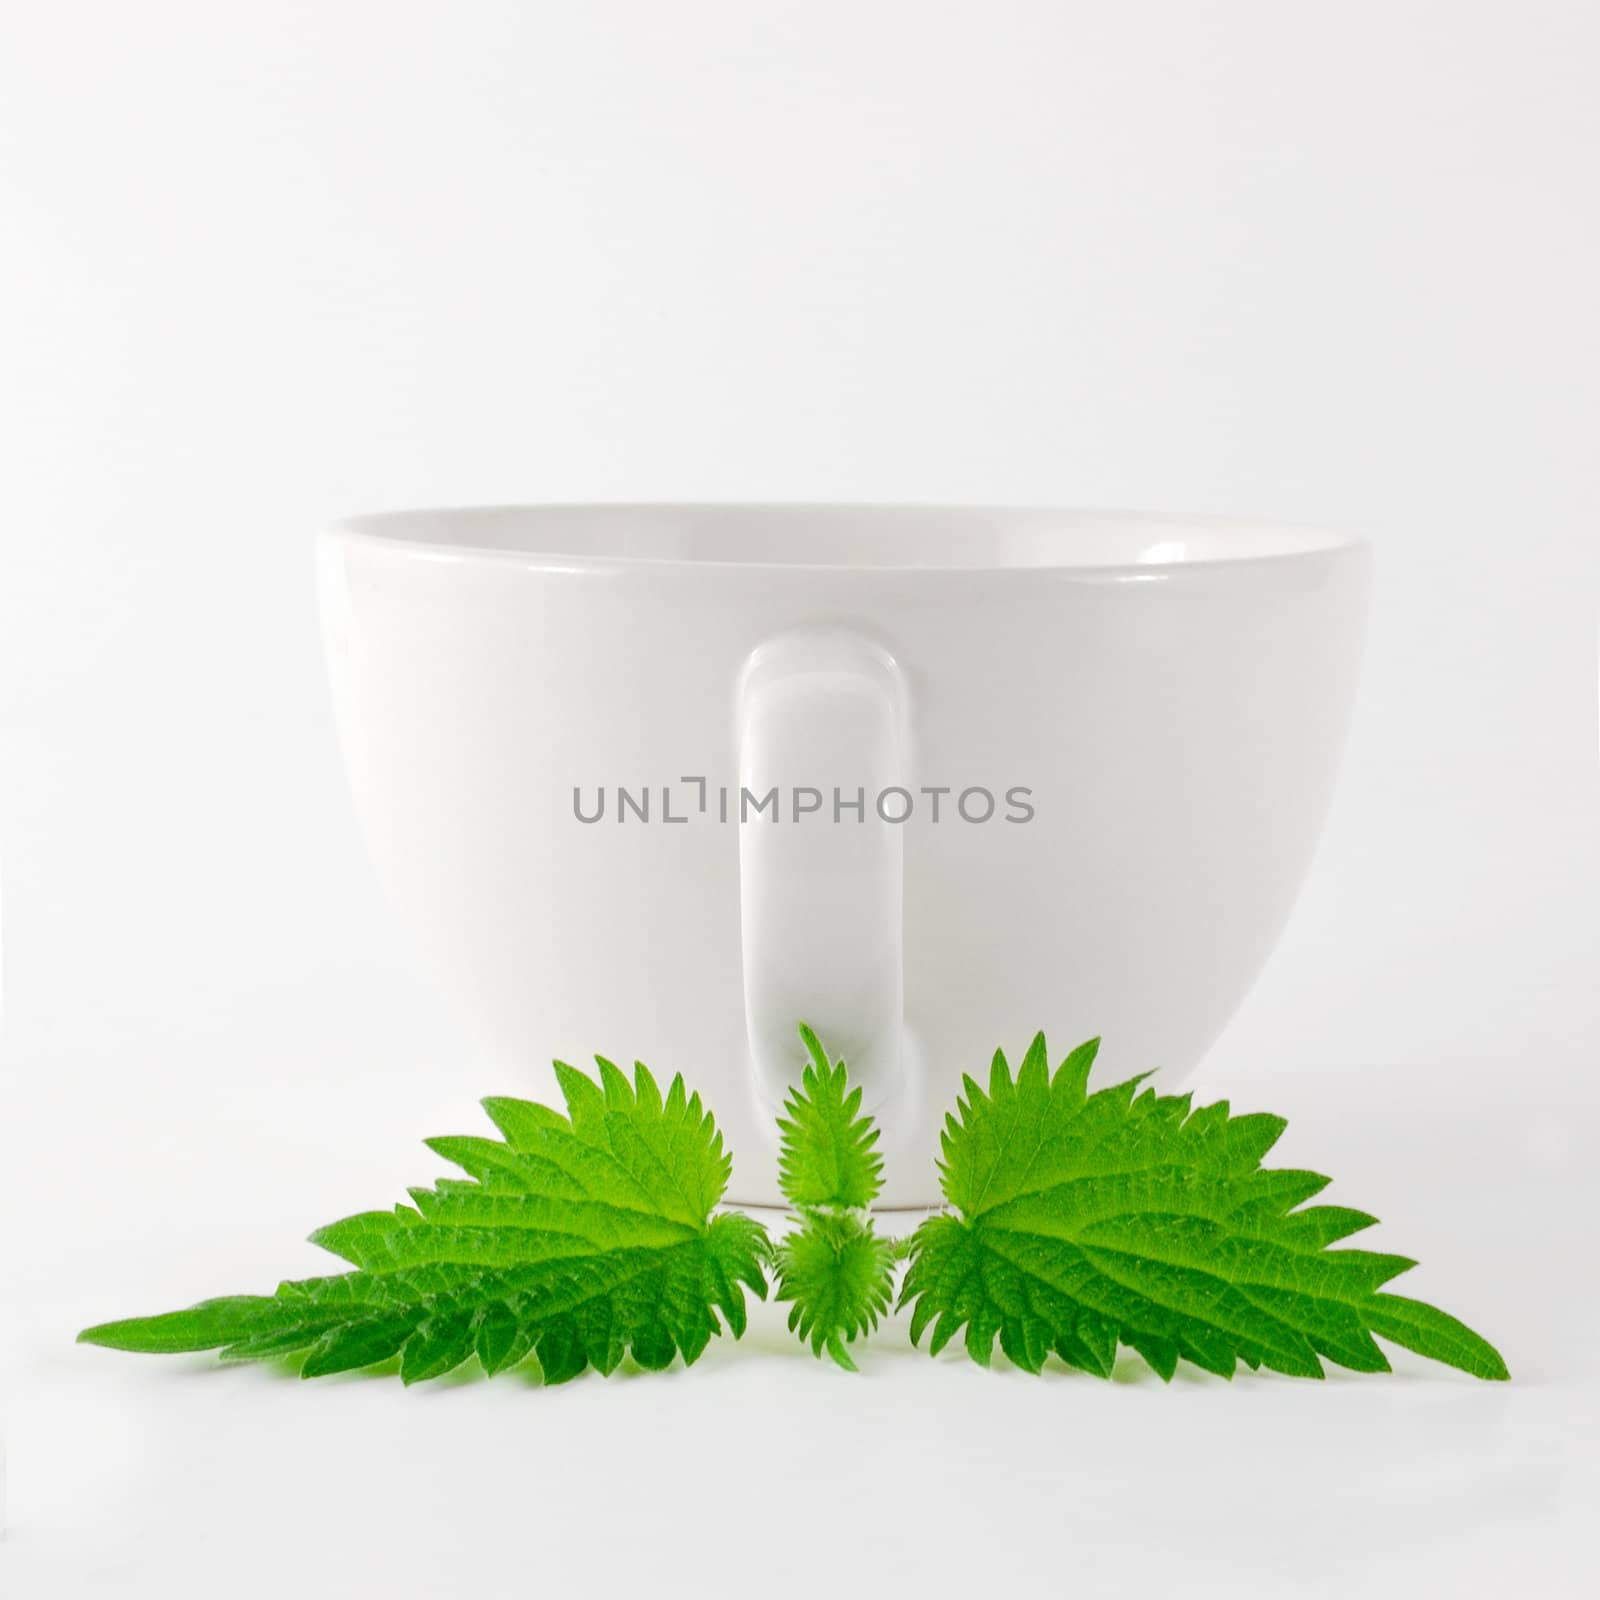 White china mug with nettle leaf in front of it